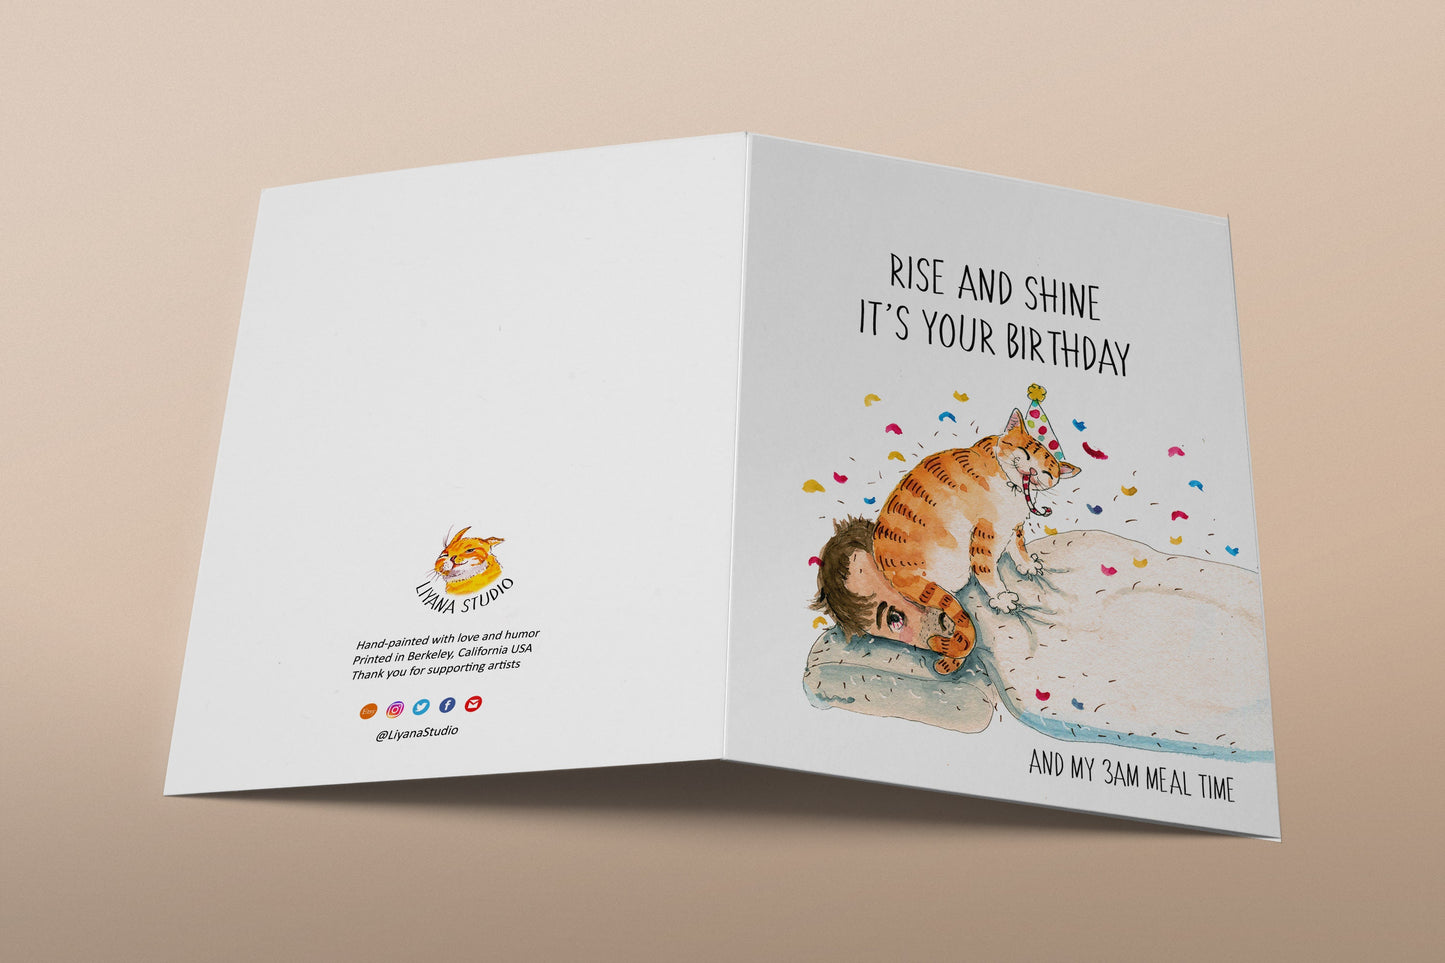 Rise and Shine - Funny Birthday Card From The Cat - Rude Gifts For Cat Lover